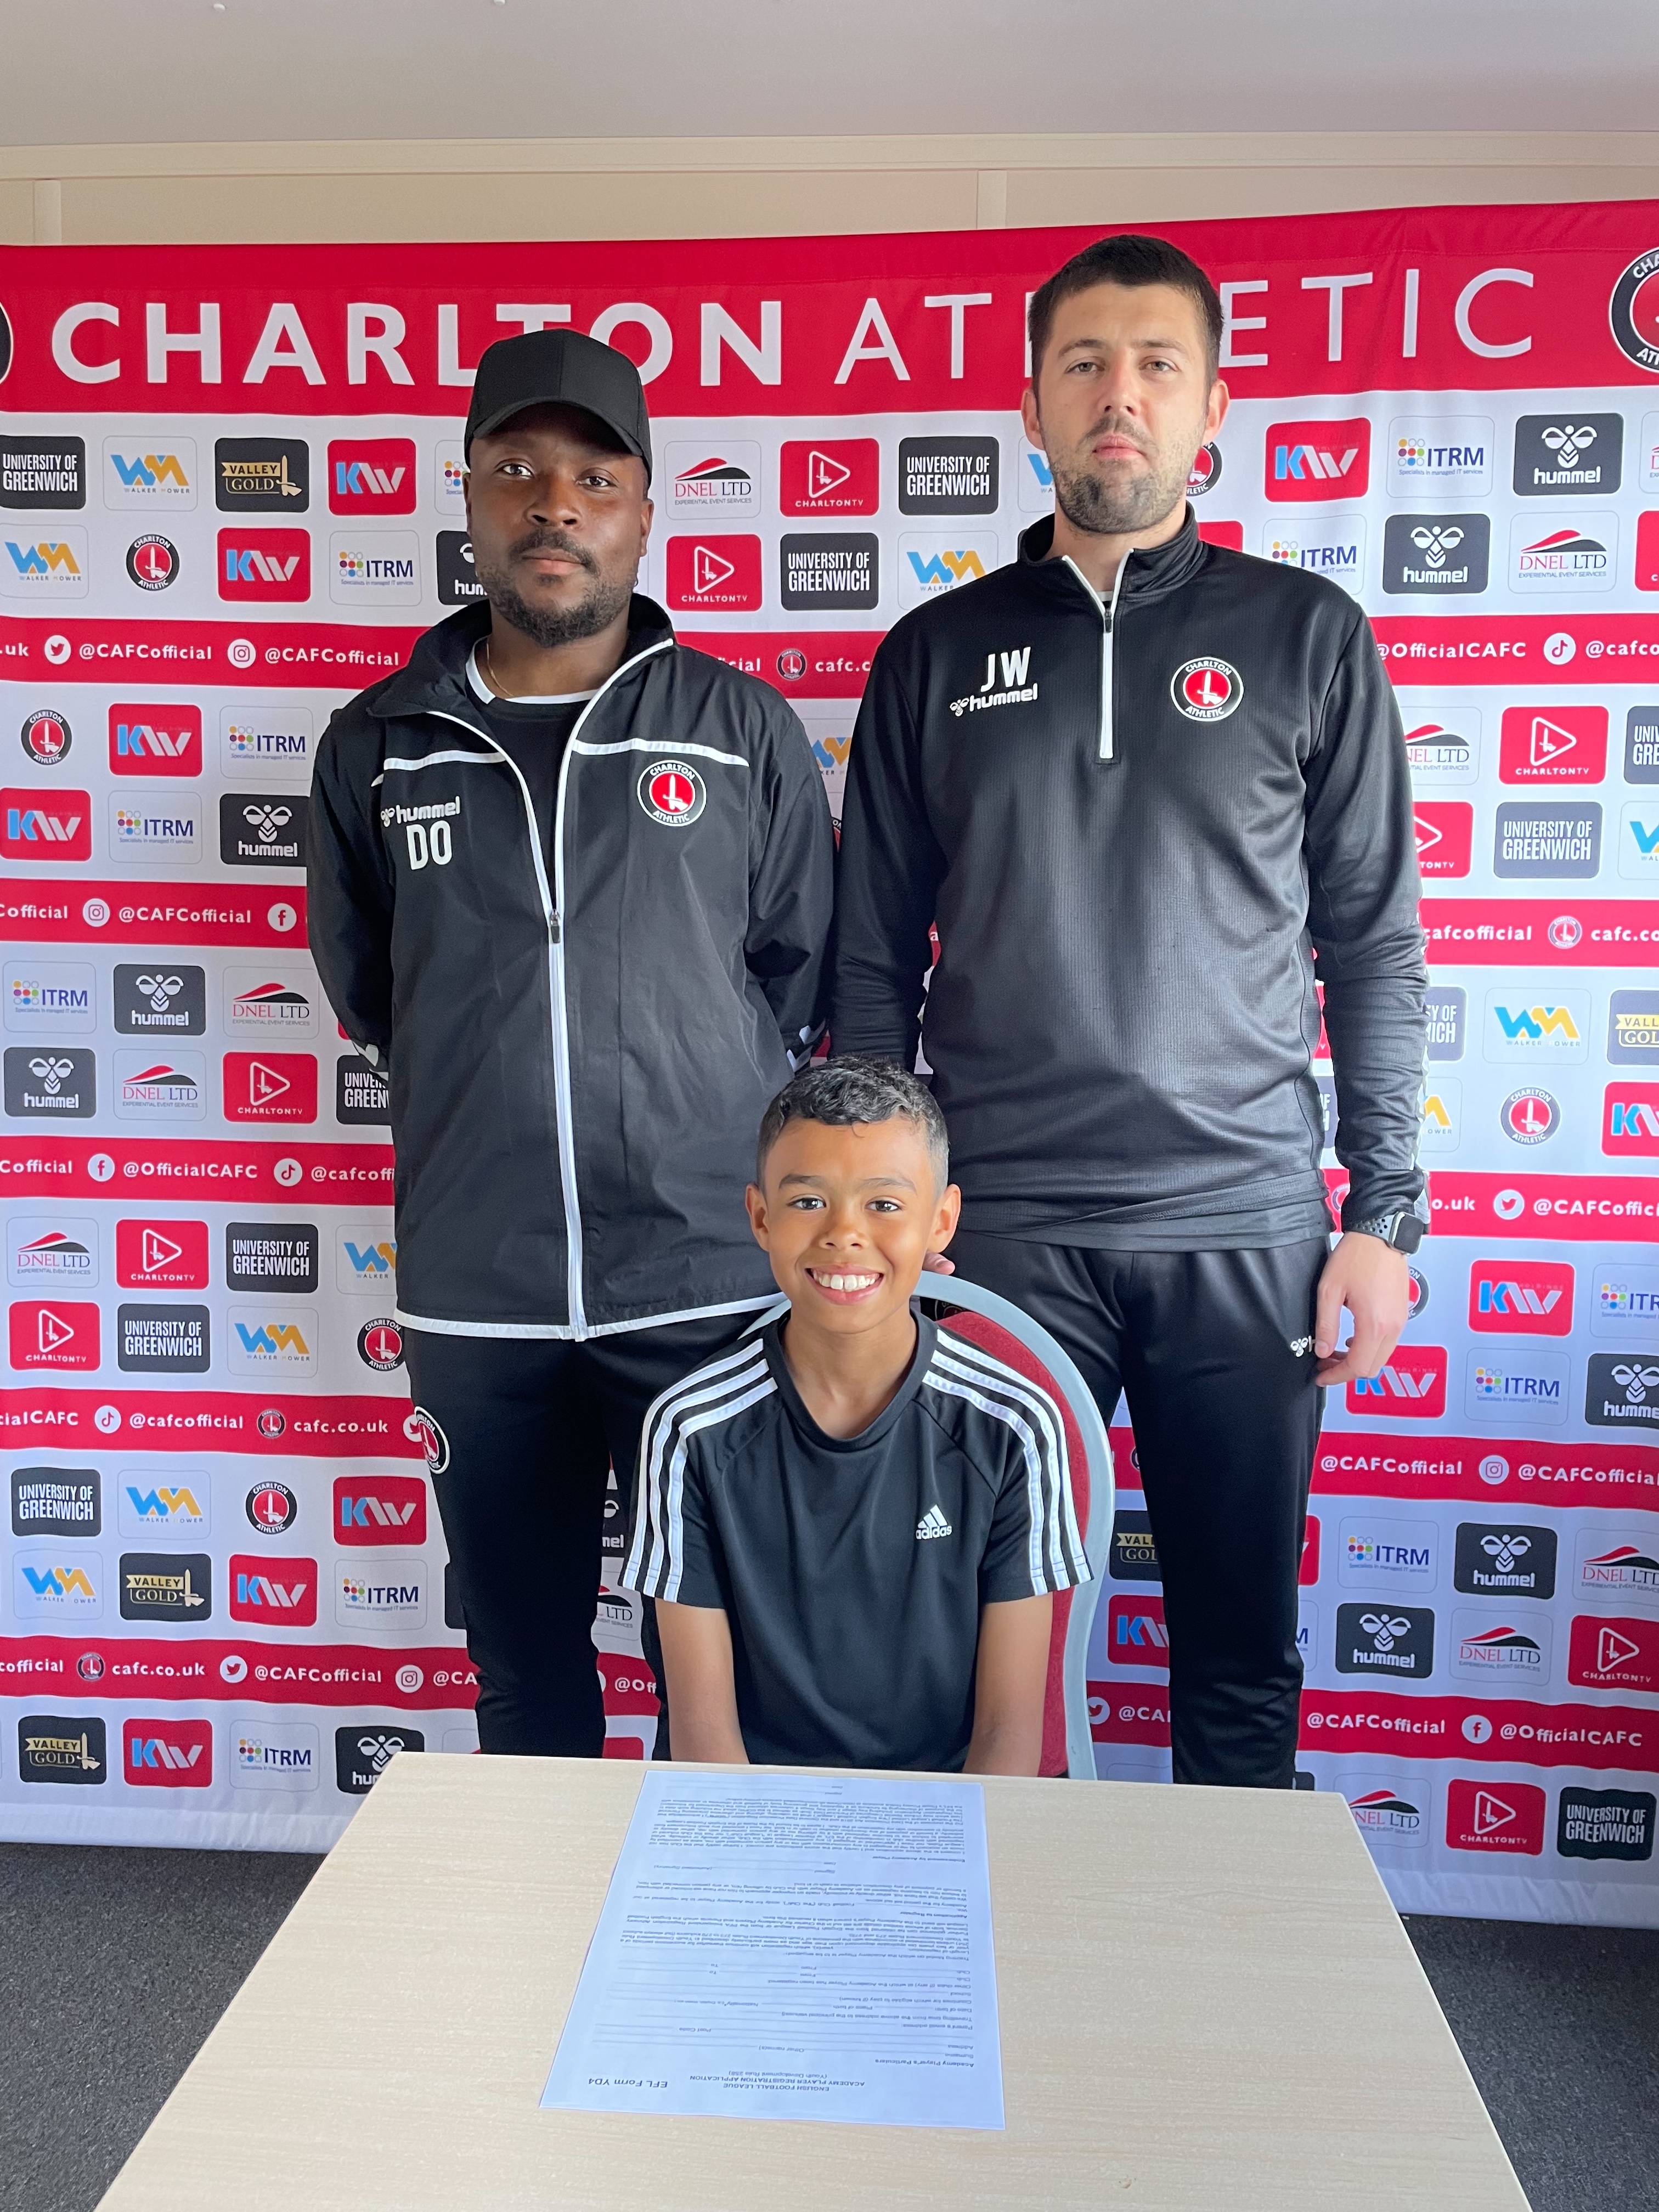 Jake Maloney signing his contract at a small table alongside CAFC Academy staff